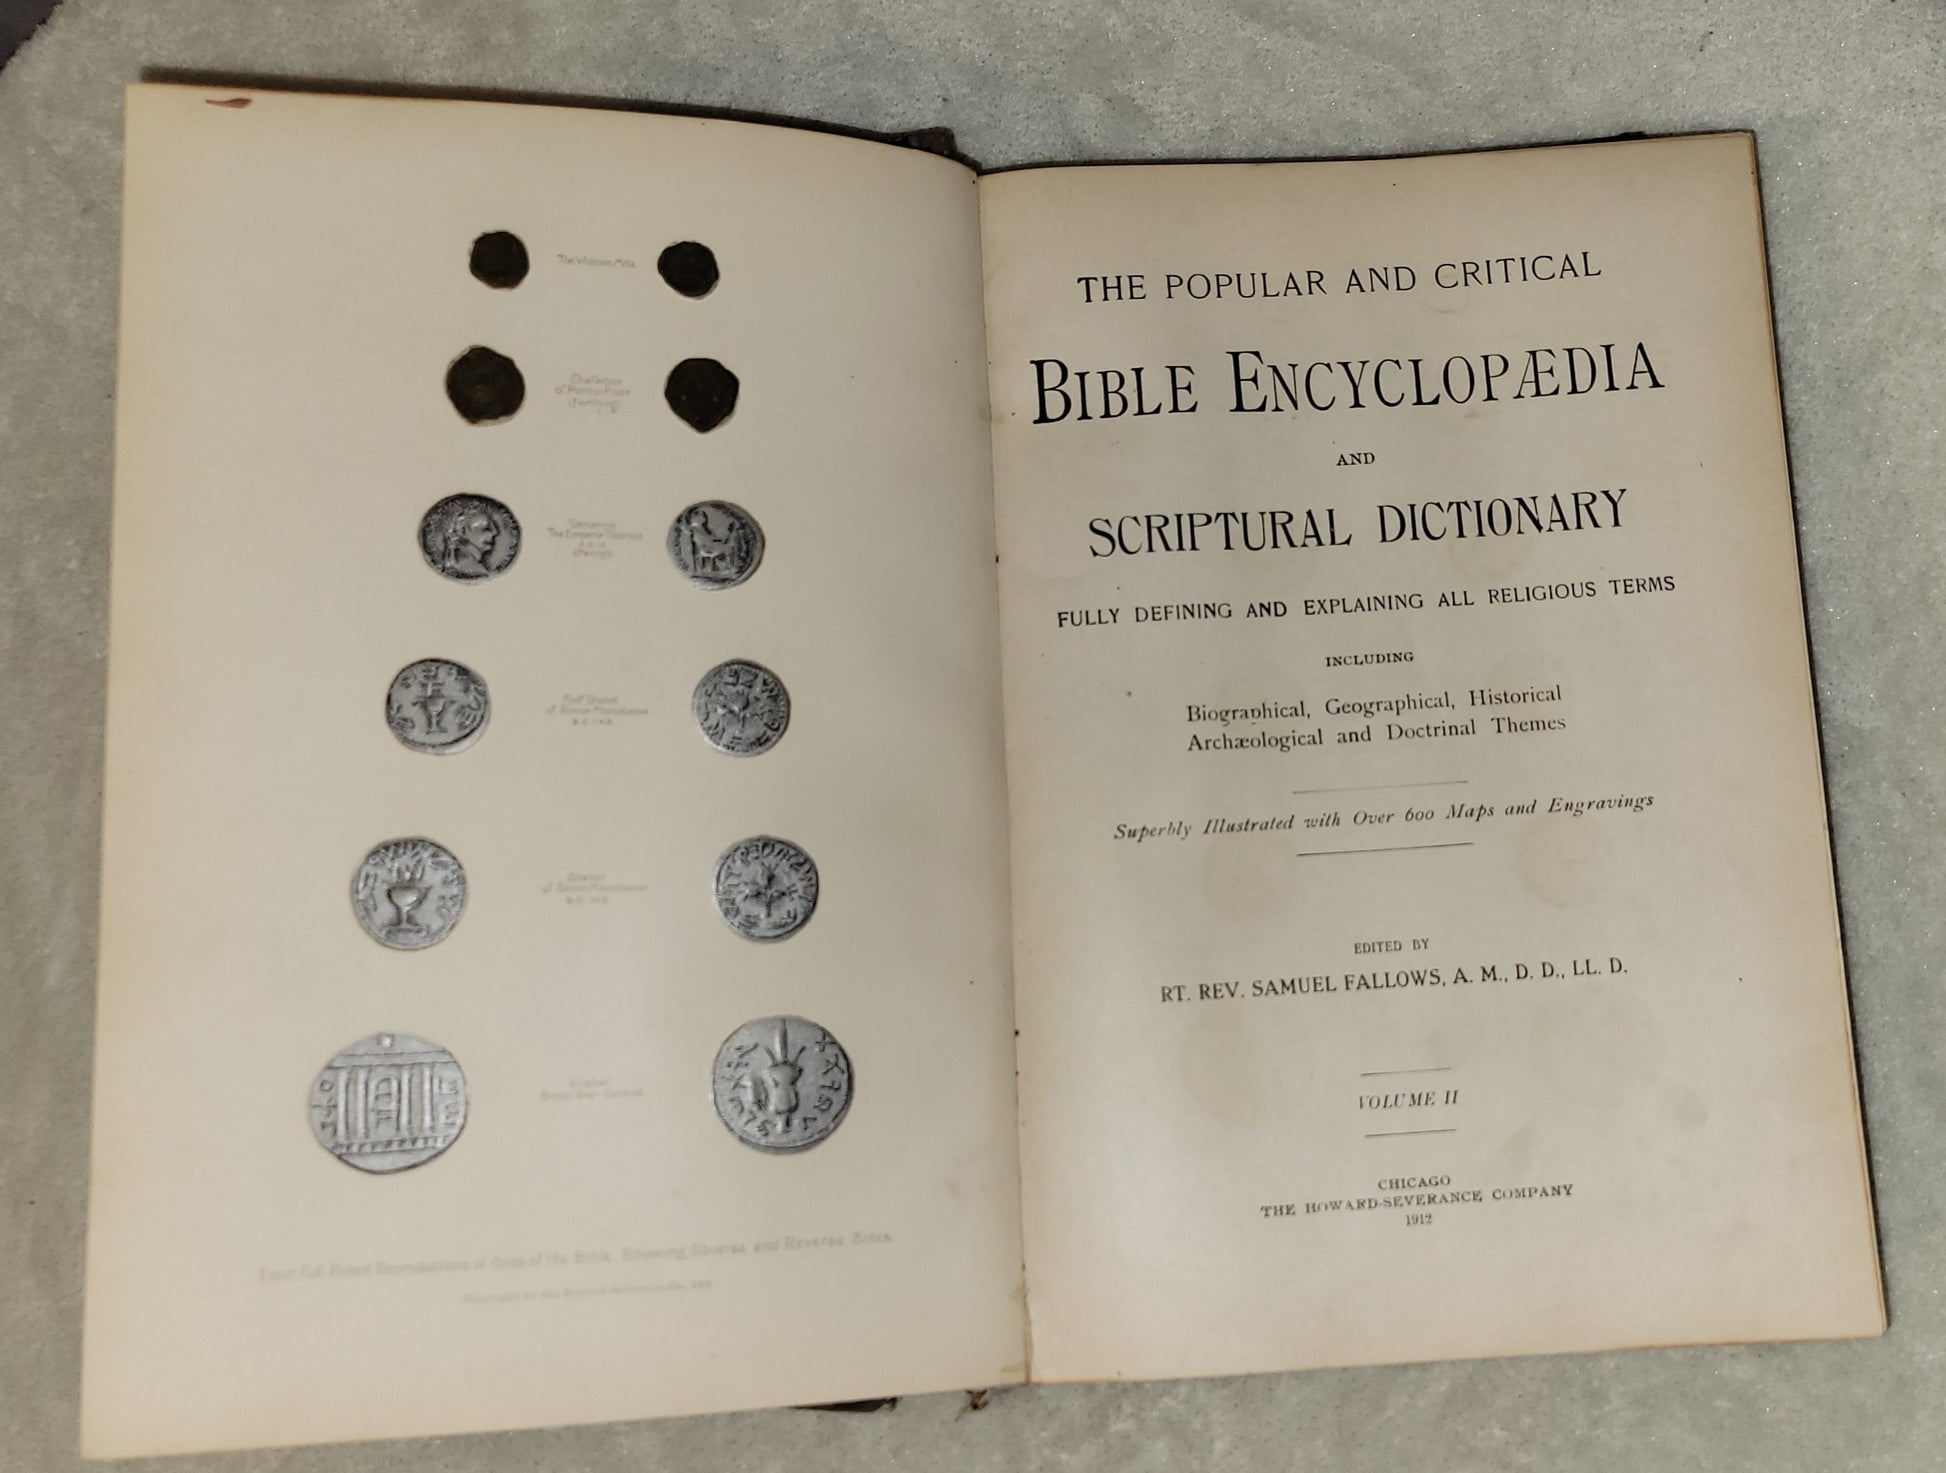 Antique book for sale "The Popular and Critical Bible Encyclopedia and Scriptural Dictionary: Fully Defining and Explaining All Religious Terms" Volume 2, edited by Rt. Rev. Samuel Fallows. Title page.